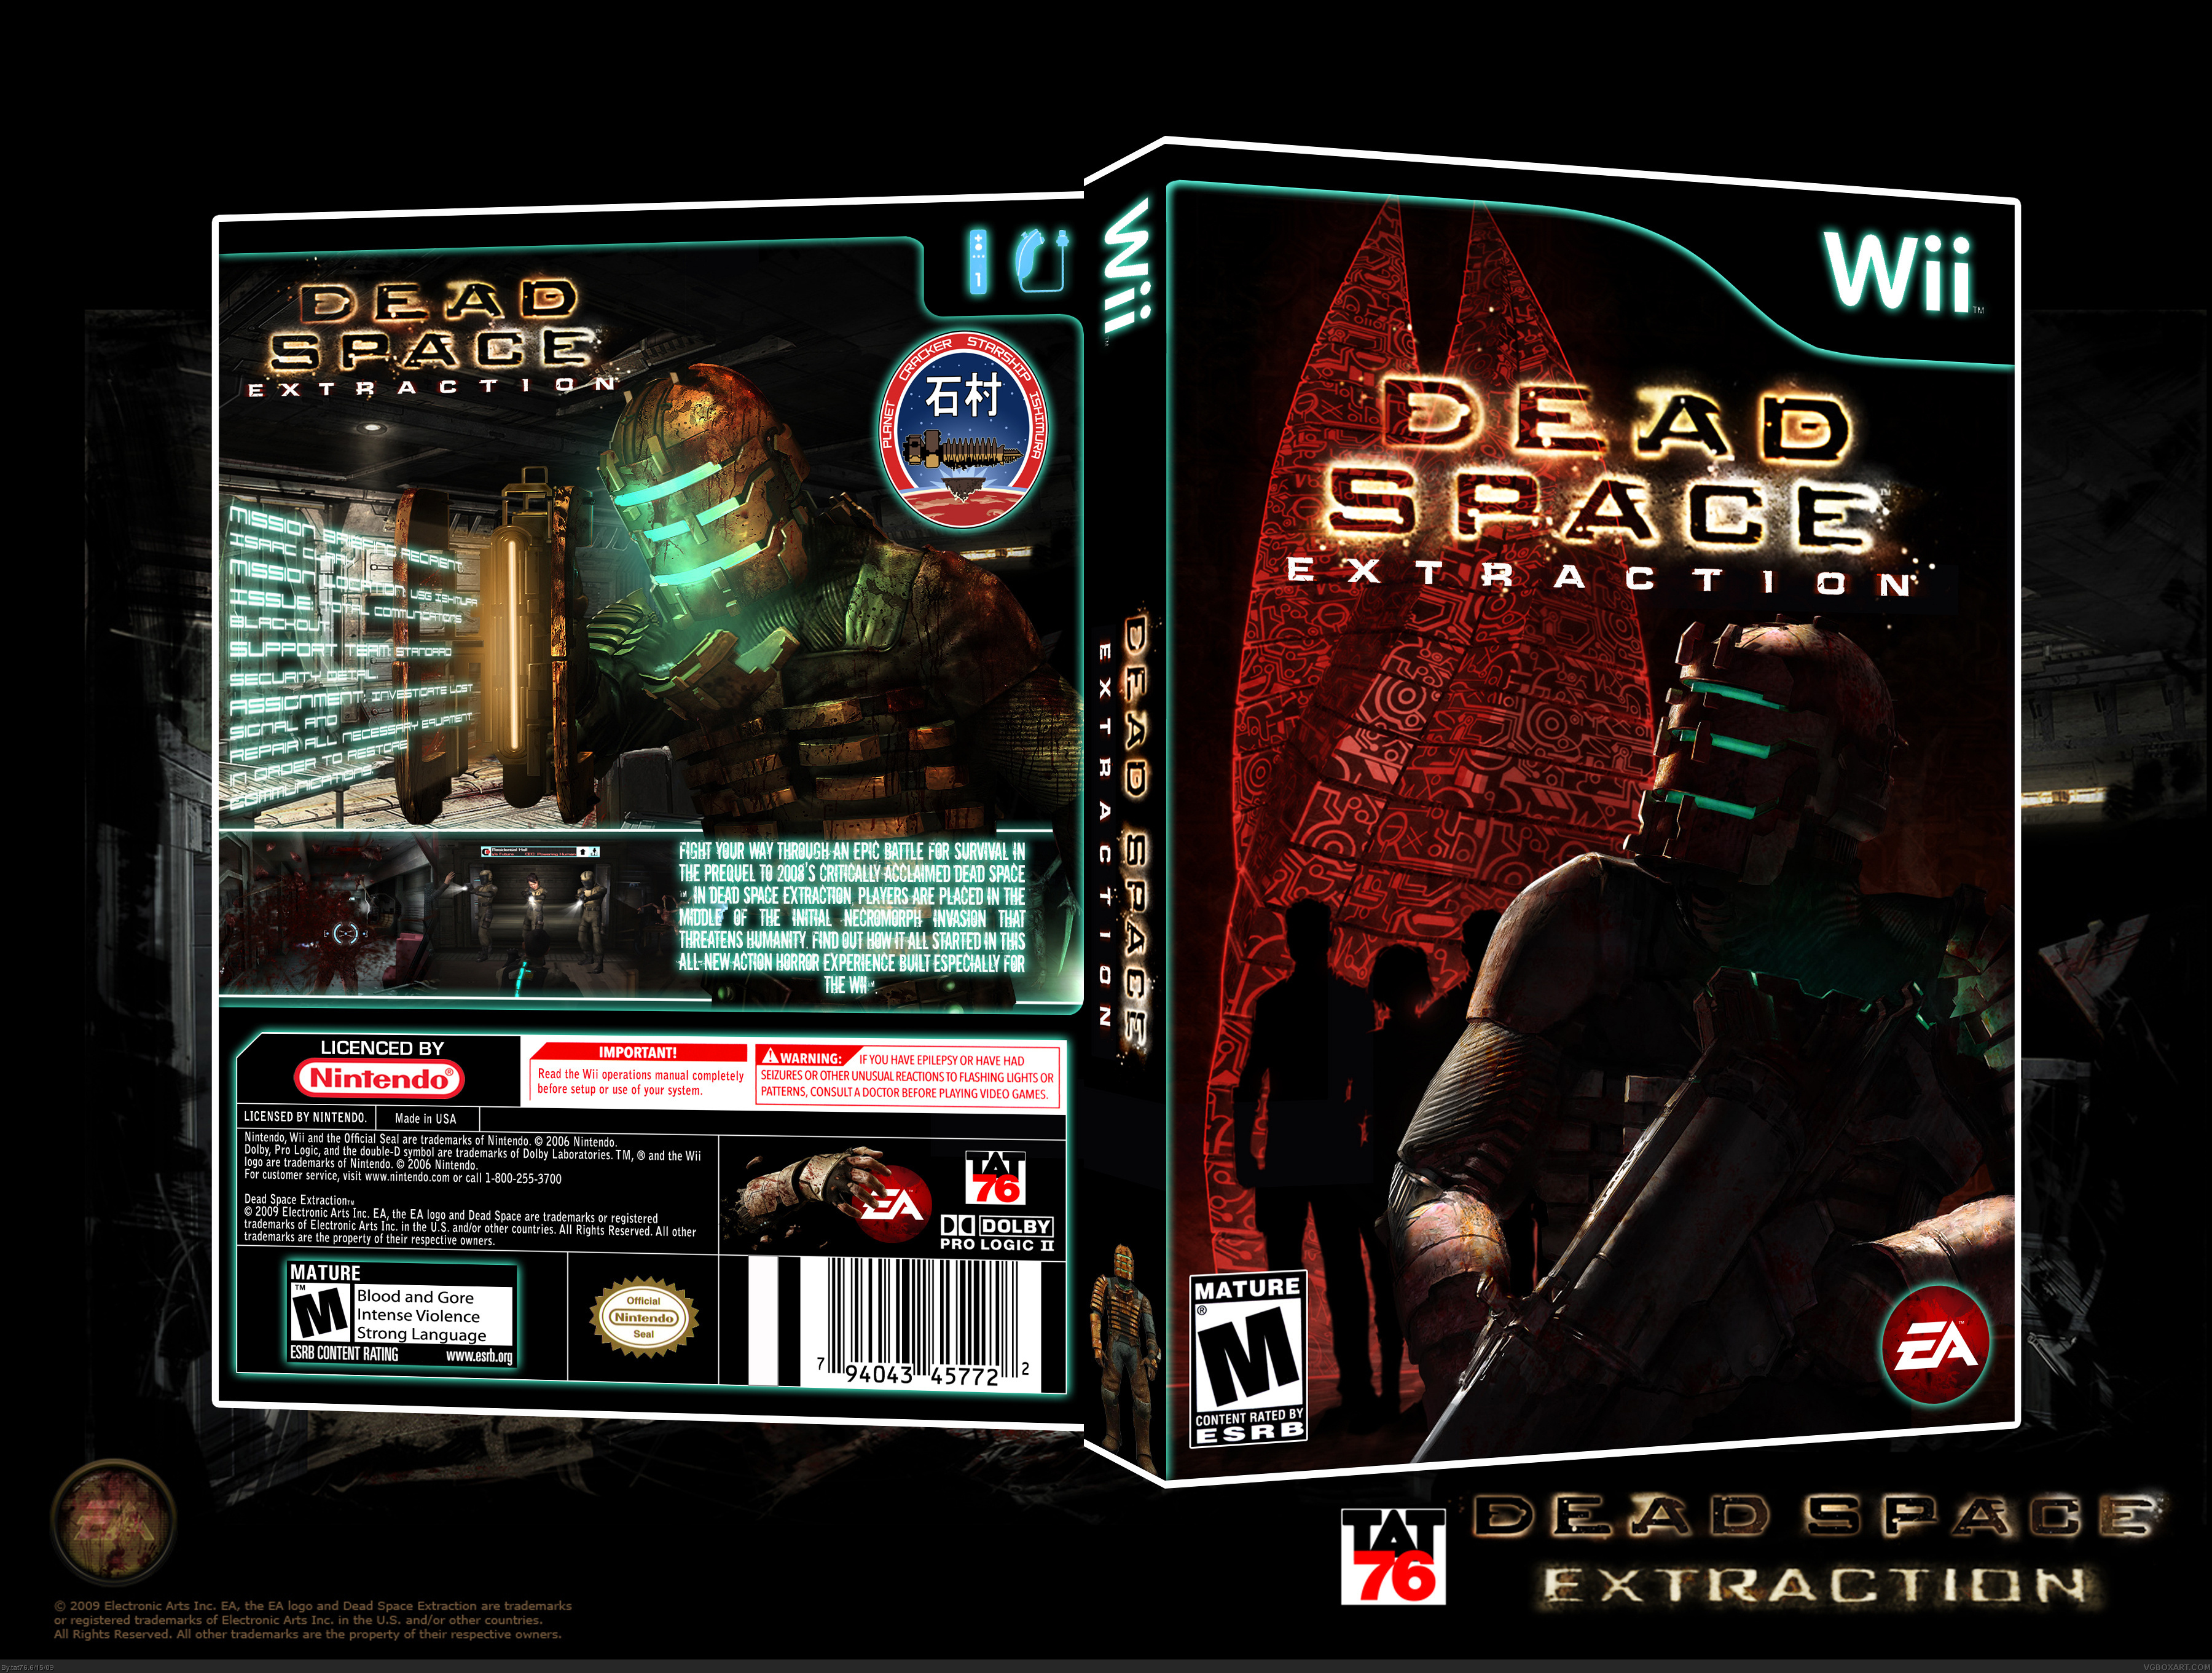 Dead Space Extraction box cover